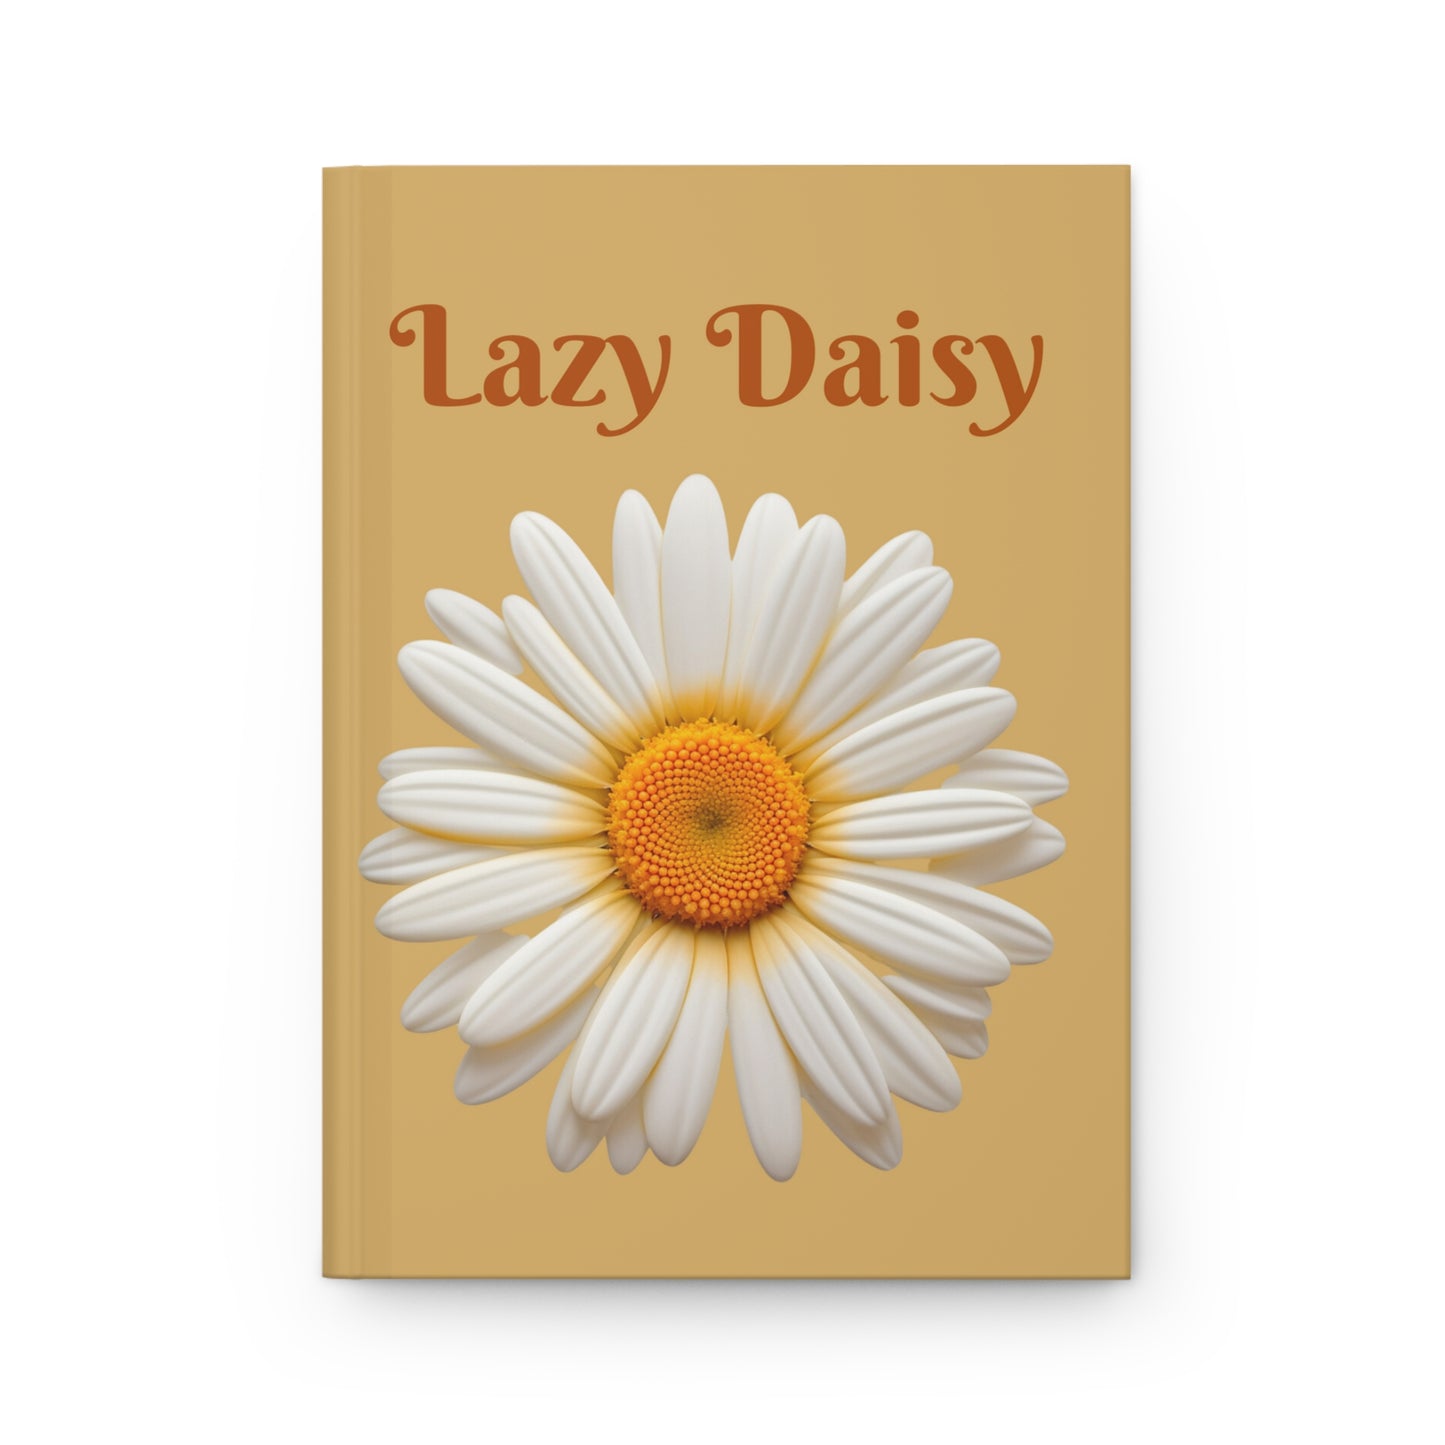 Daisy Delight Hardcover Journal: Floral Notebook, Daily Reflections, Mindfulness & Gratitude, Wellness Companion, 6 Months, 5.75"x7.5"